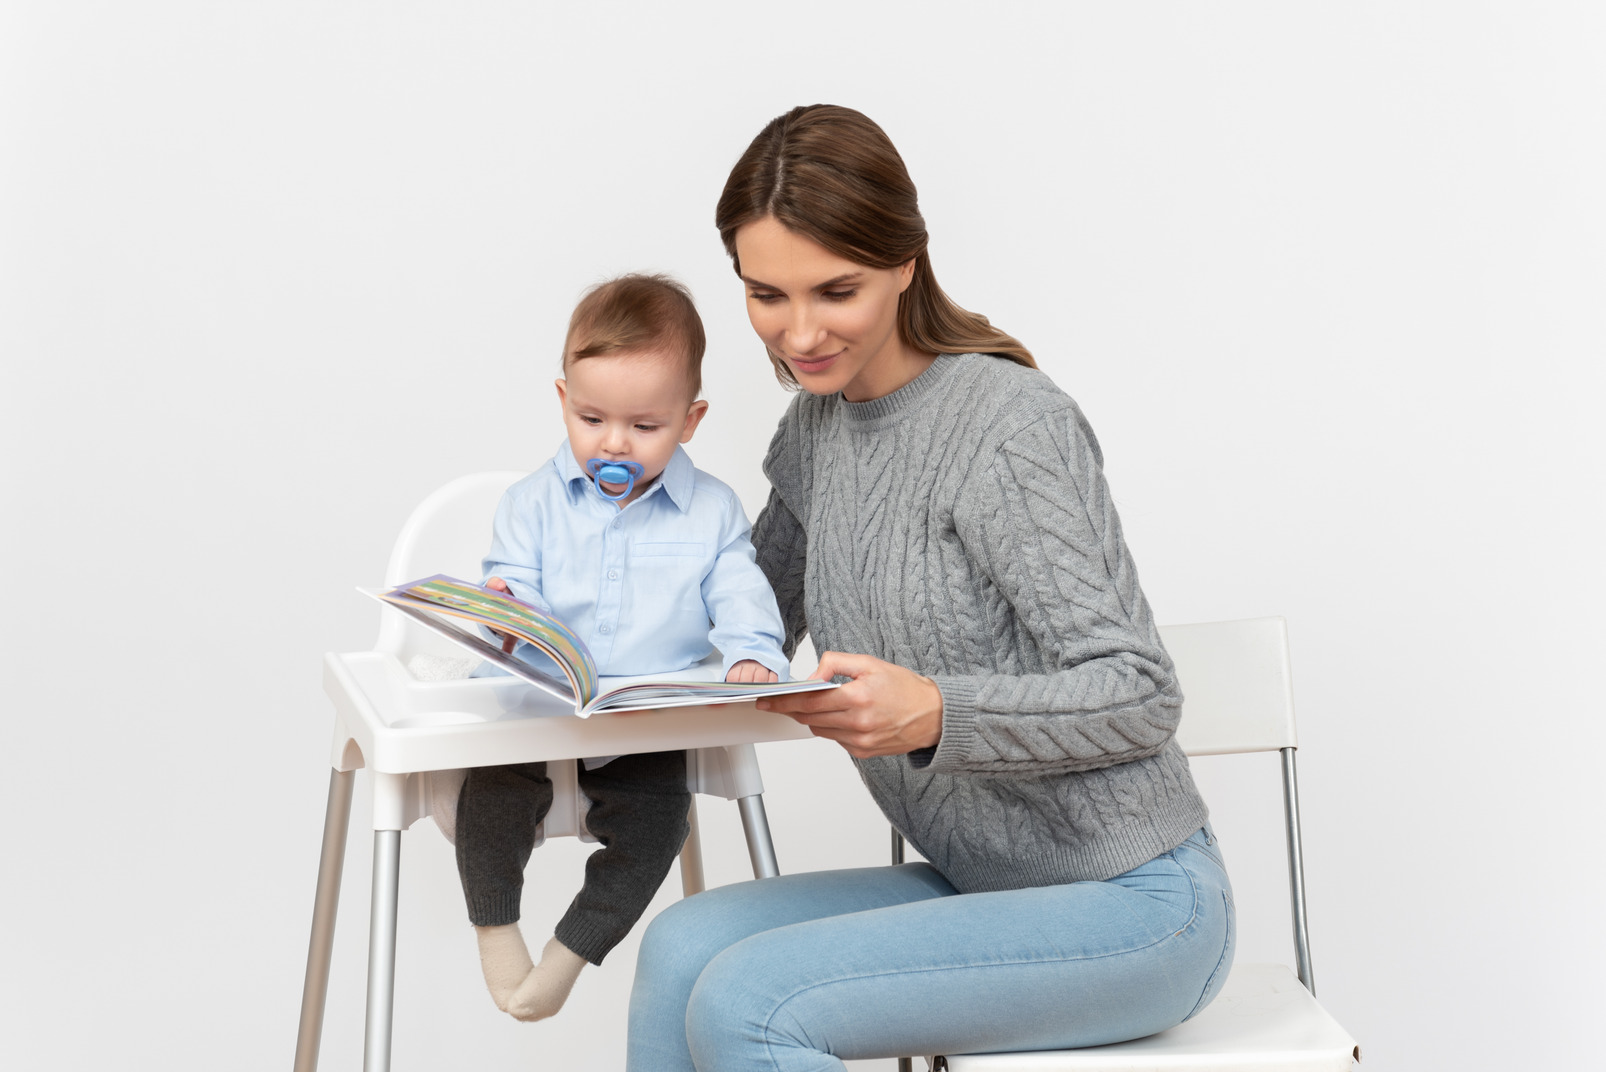 She's getting her son in love with reading at a very early age